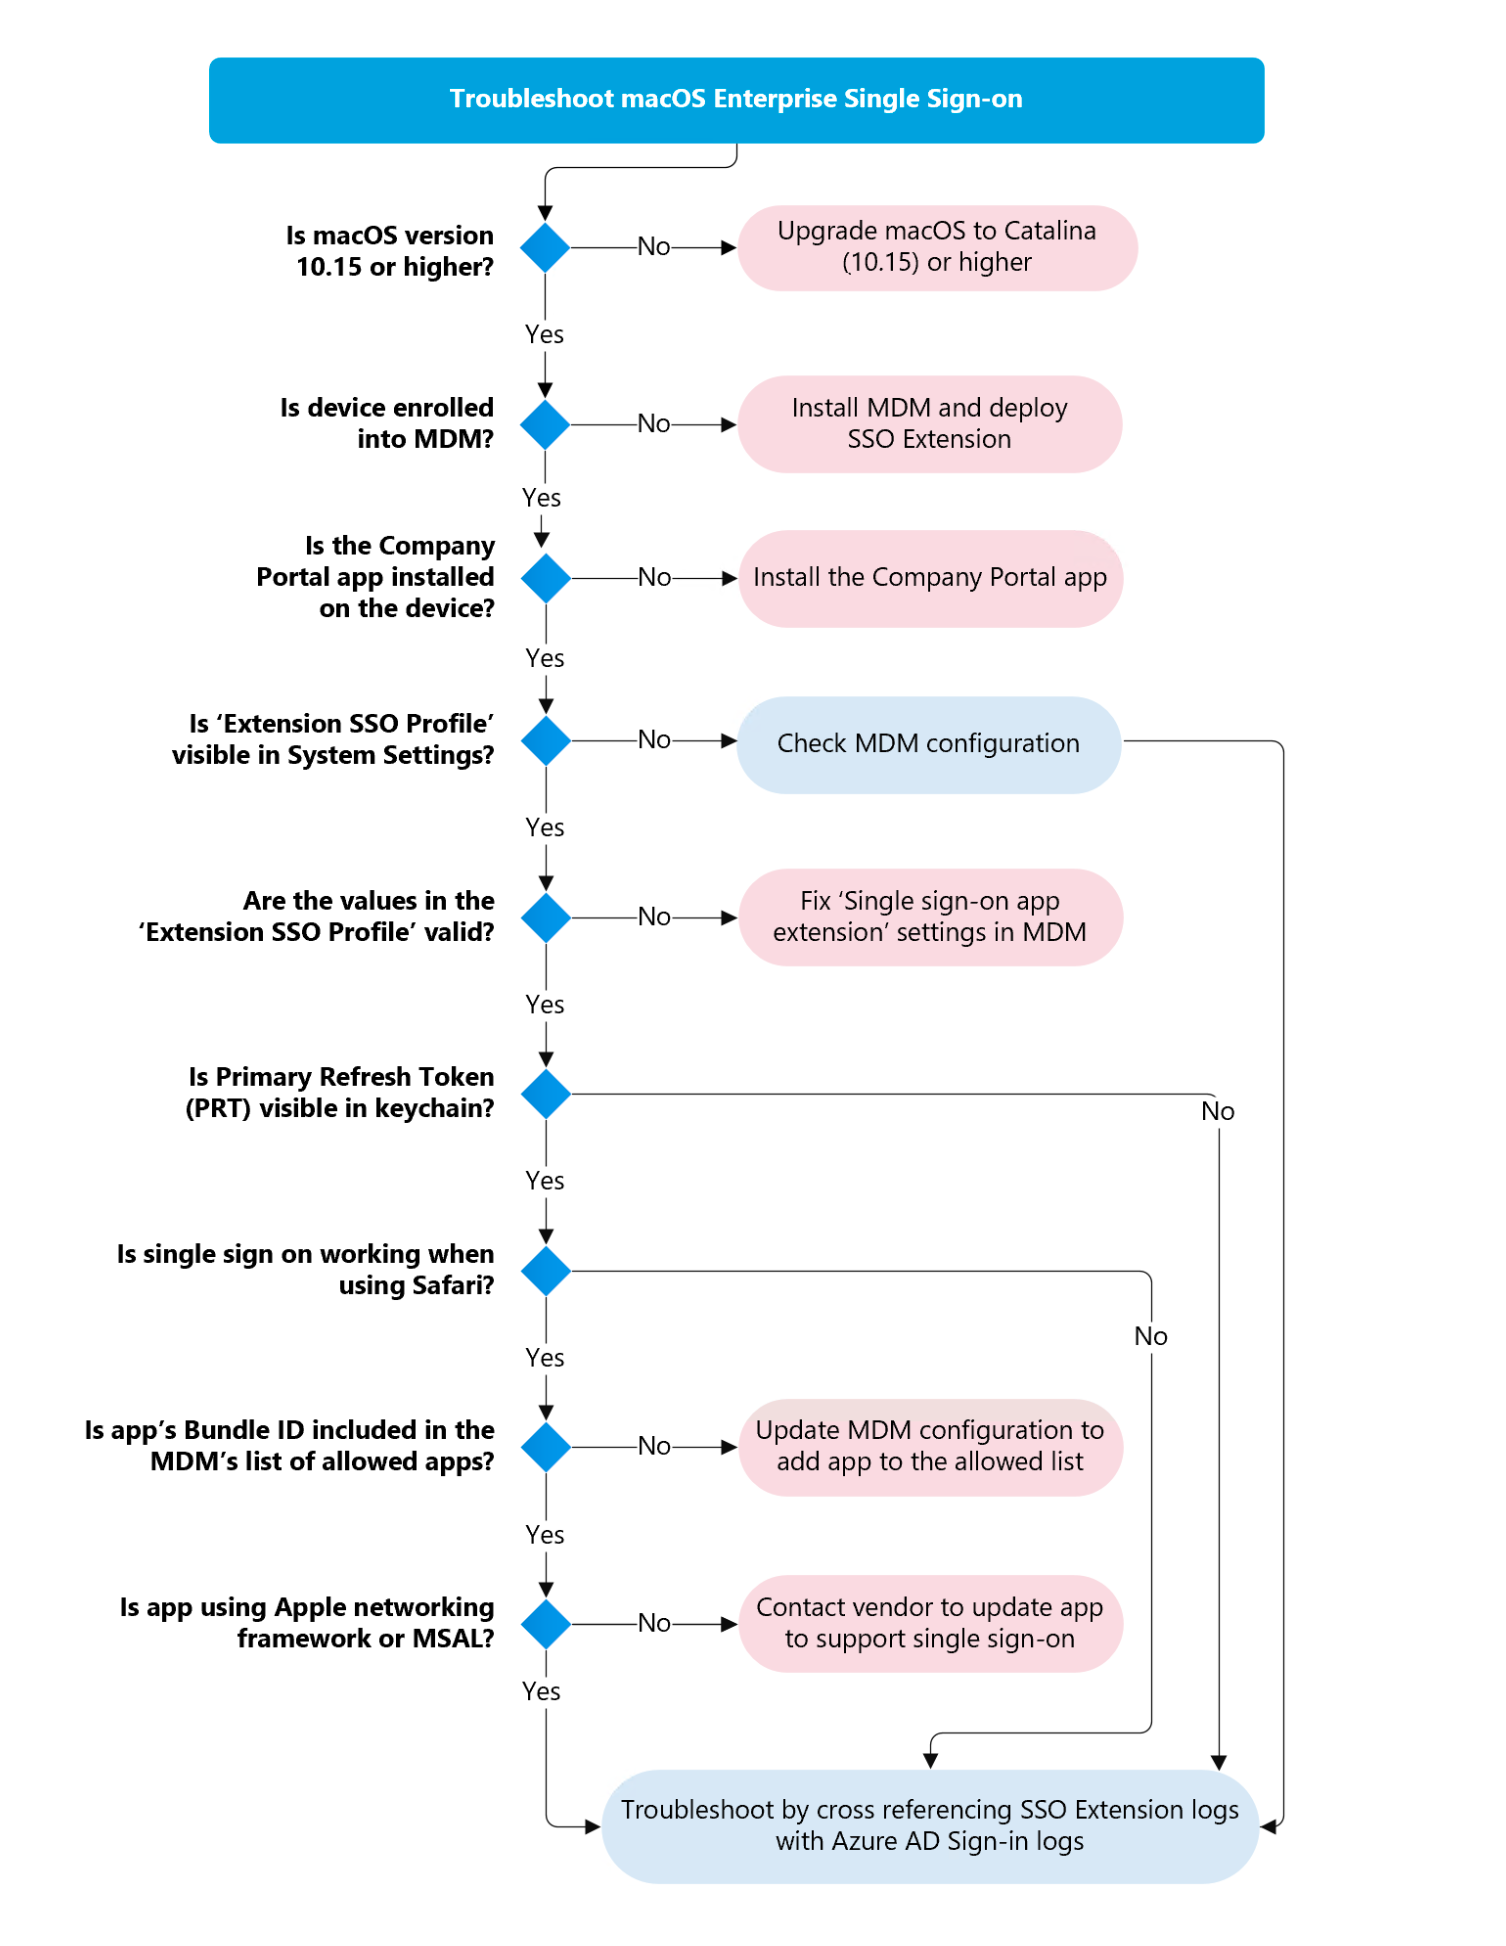 Screenshot of flowchart showing the troubleshooting process flow for Apple SSO extension on macOS devices.